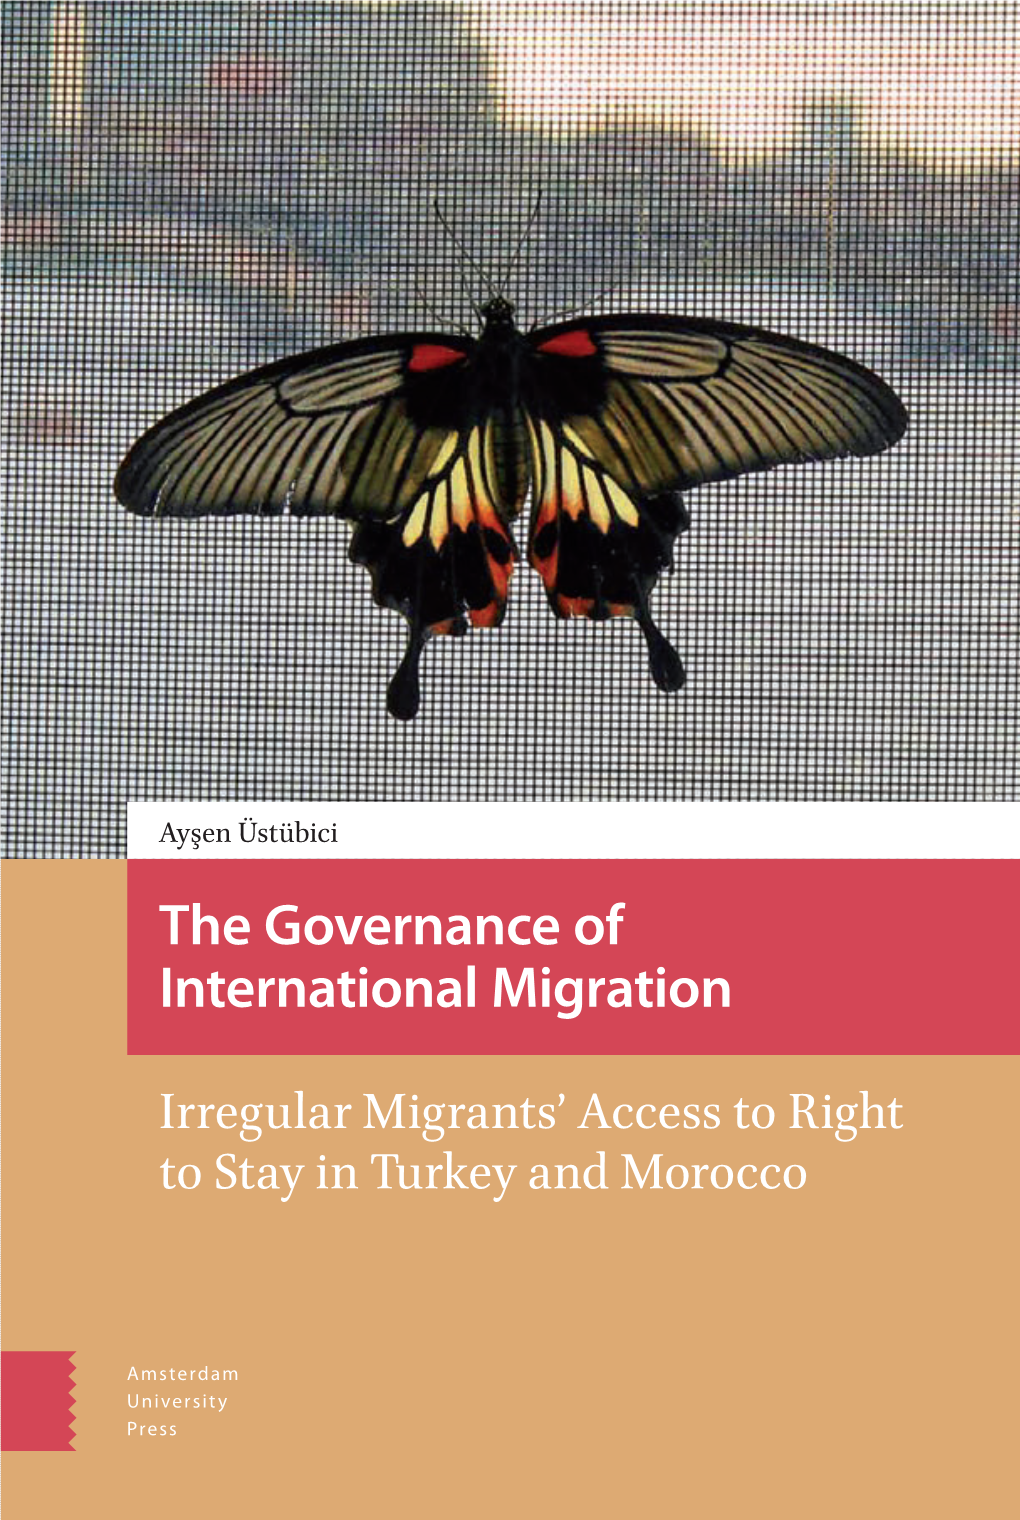 The Governance of International Migration the Governance of International Migration